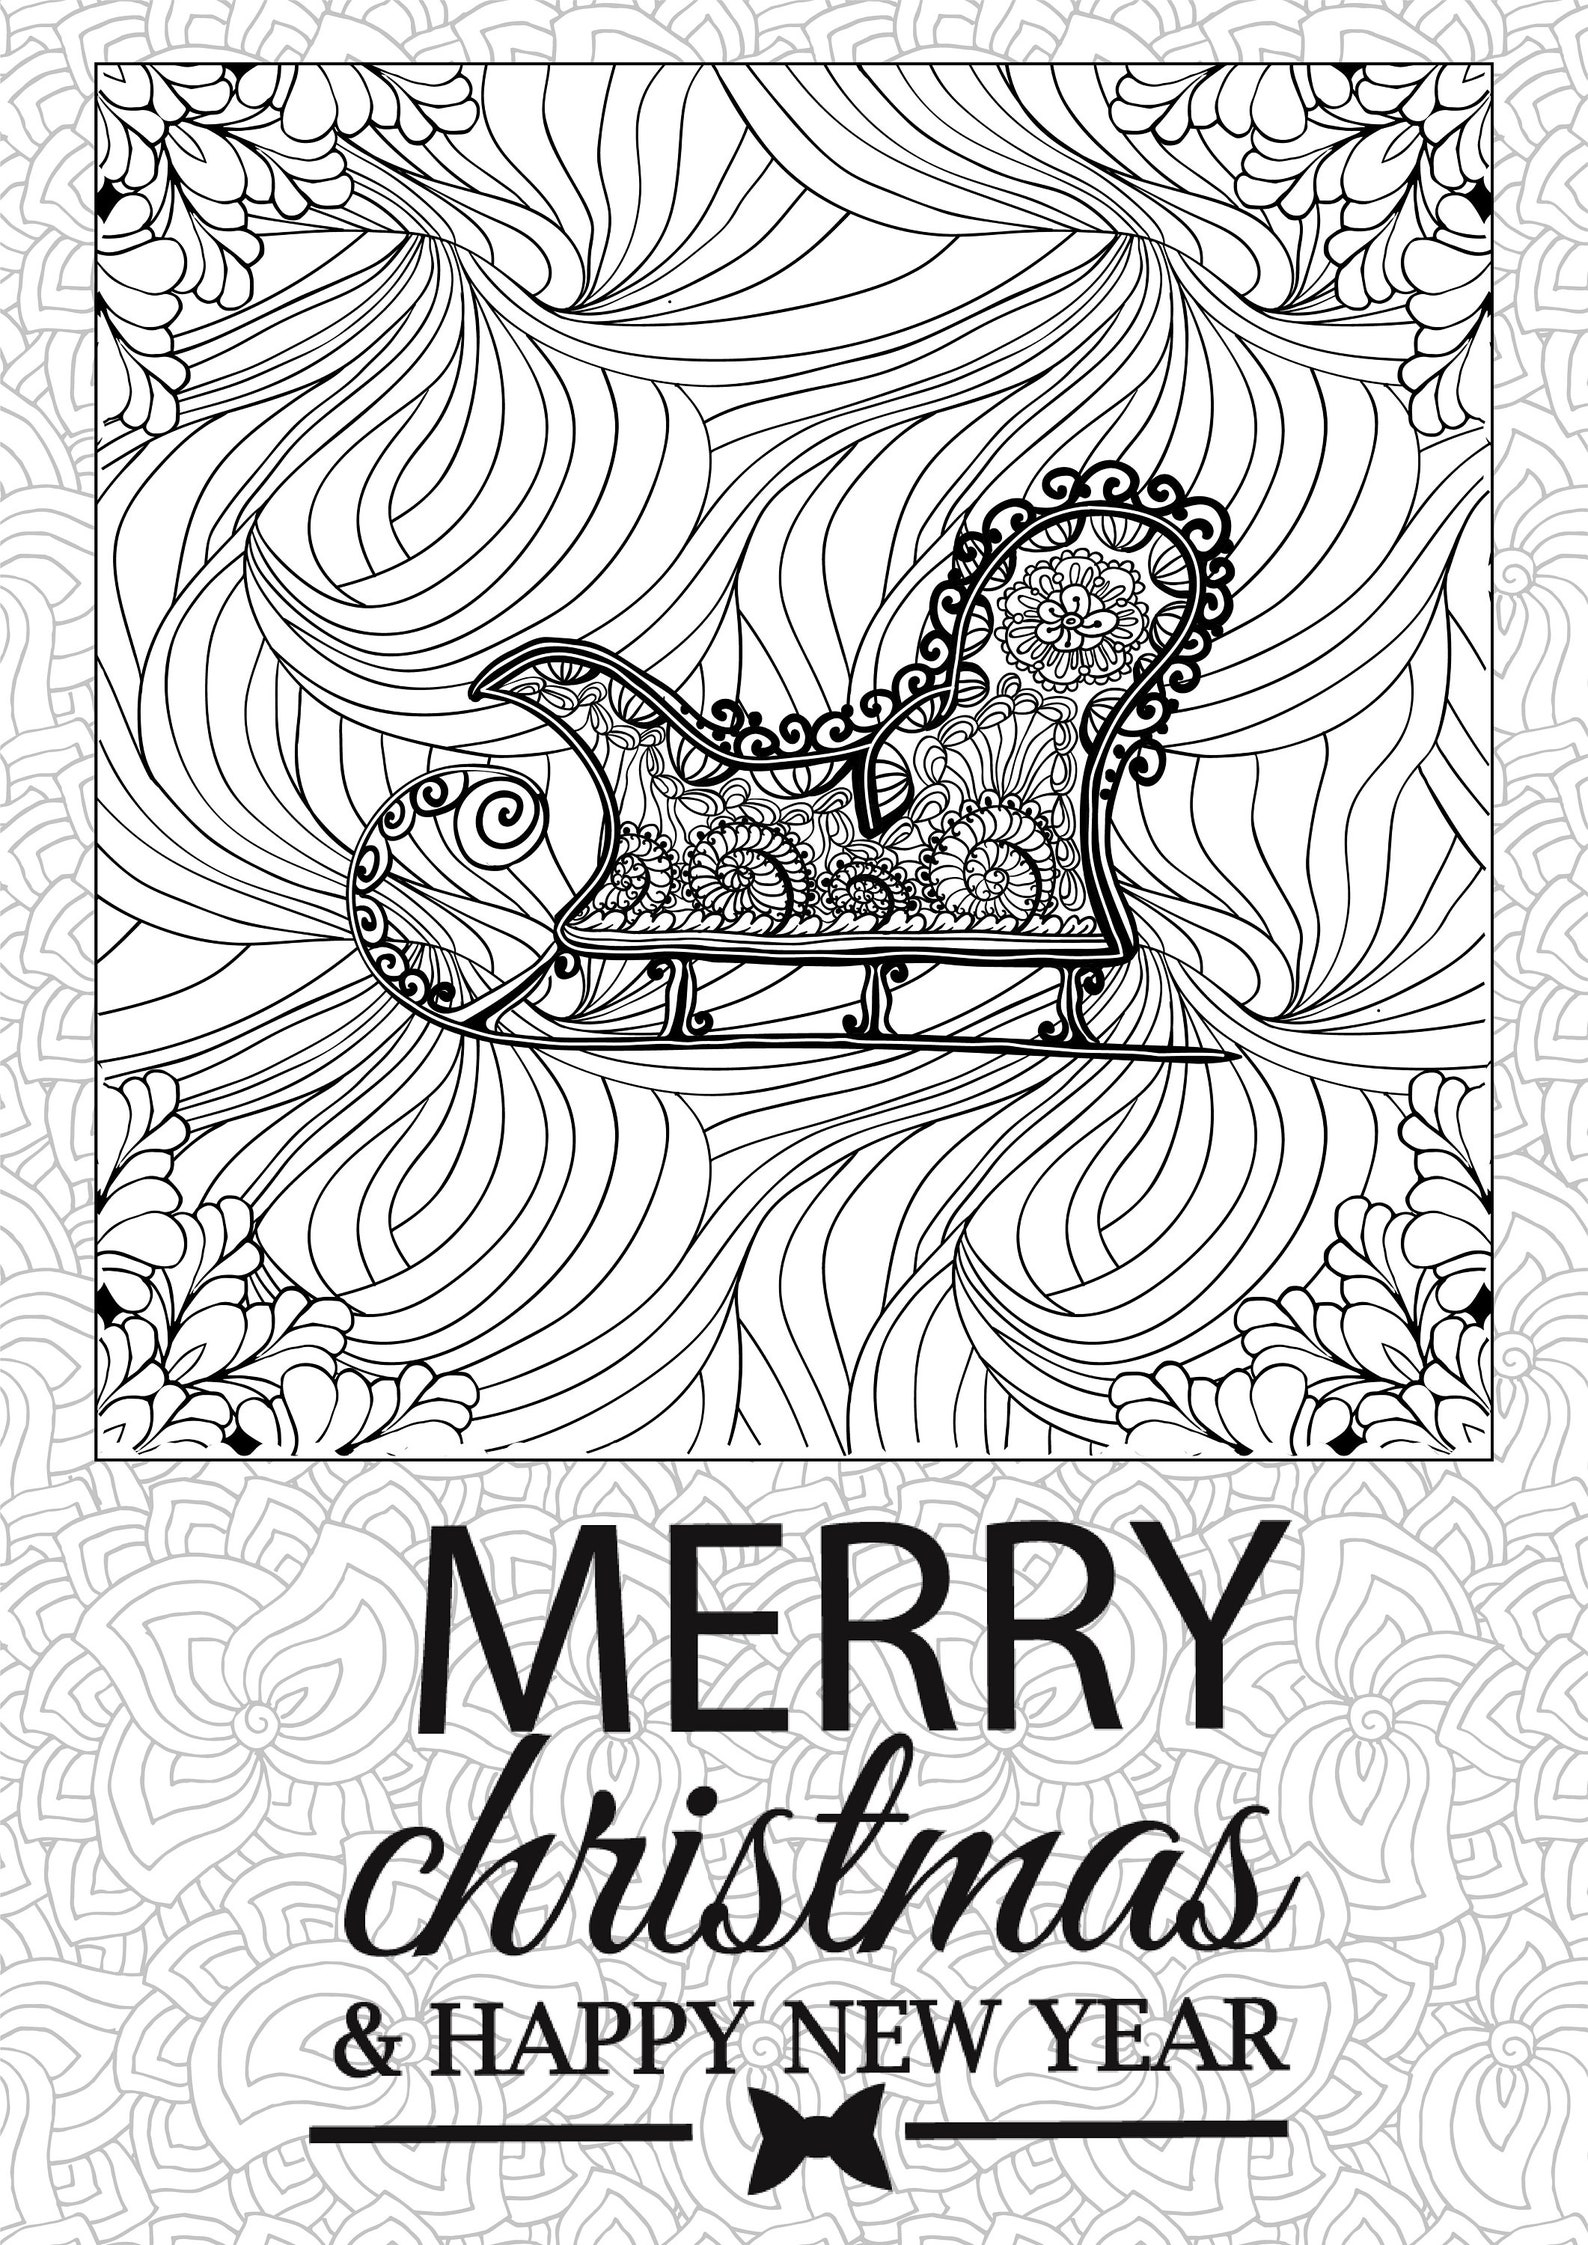 Merry Christmas Coloring Pages | Etsy